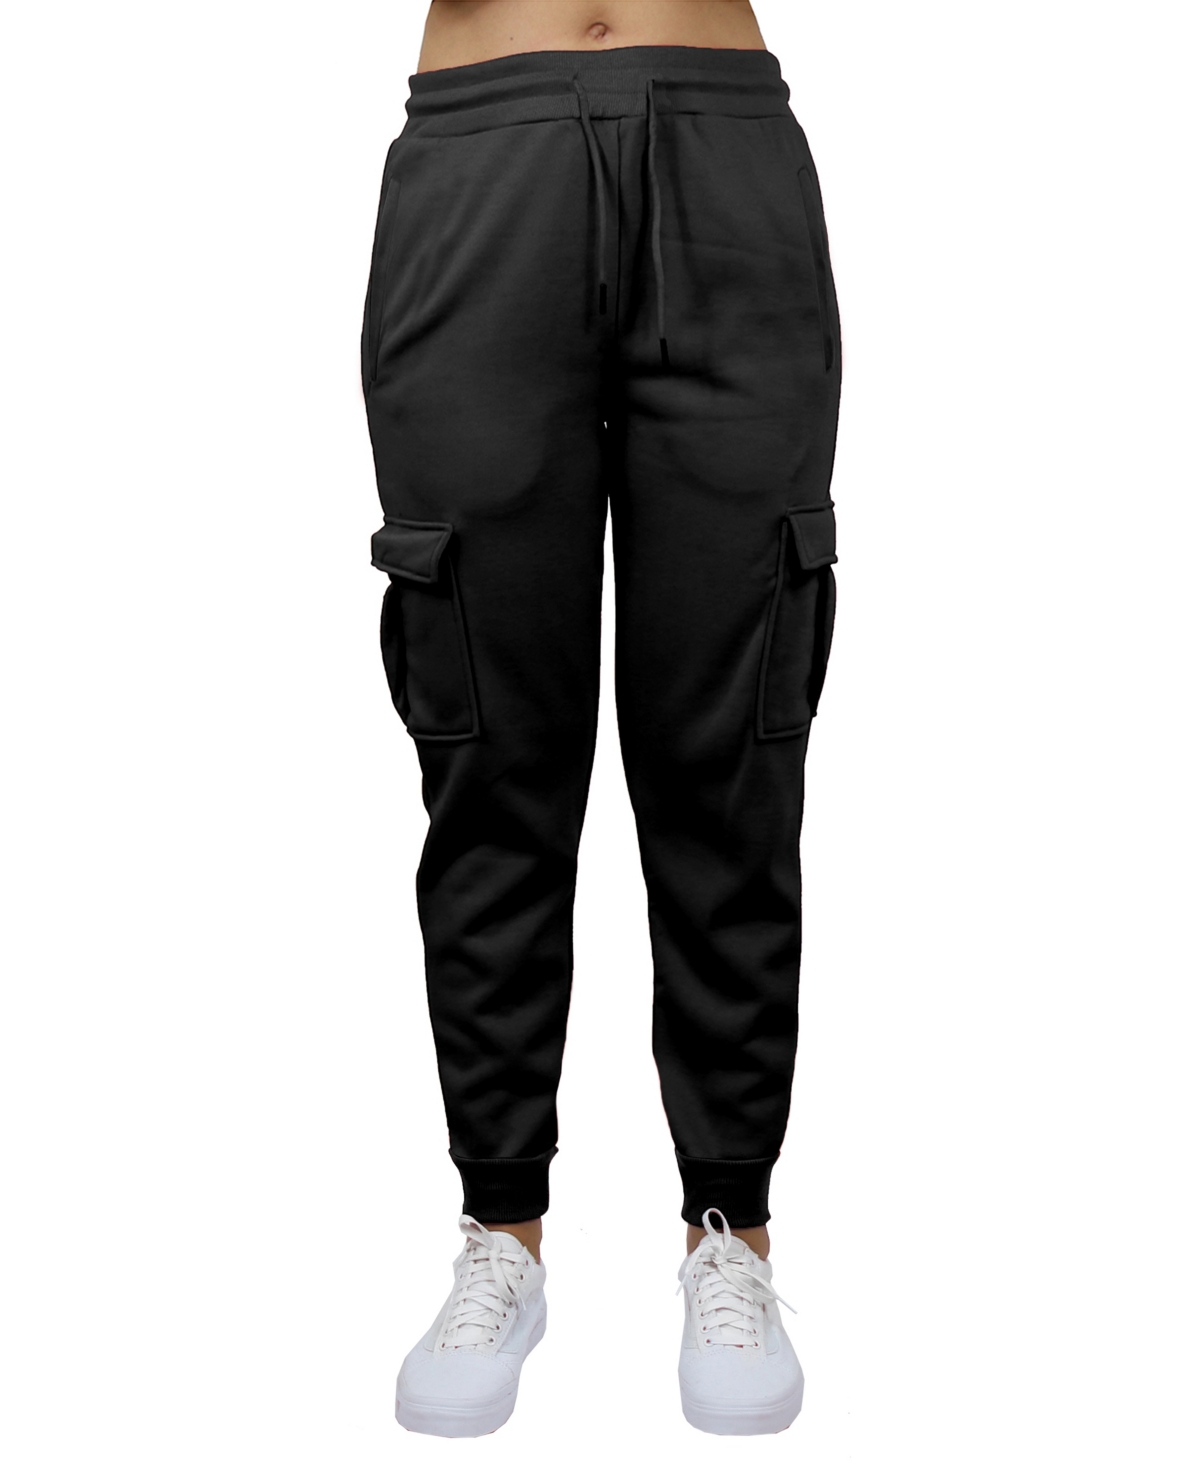 Galaxy By Harvic Women's Heavyweight Loose Fit Fleece Lined Cargo Jogger Pants In Black